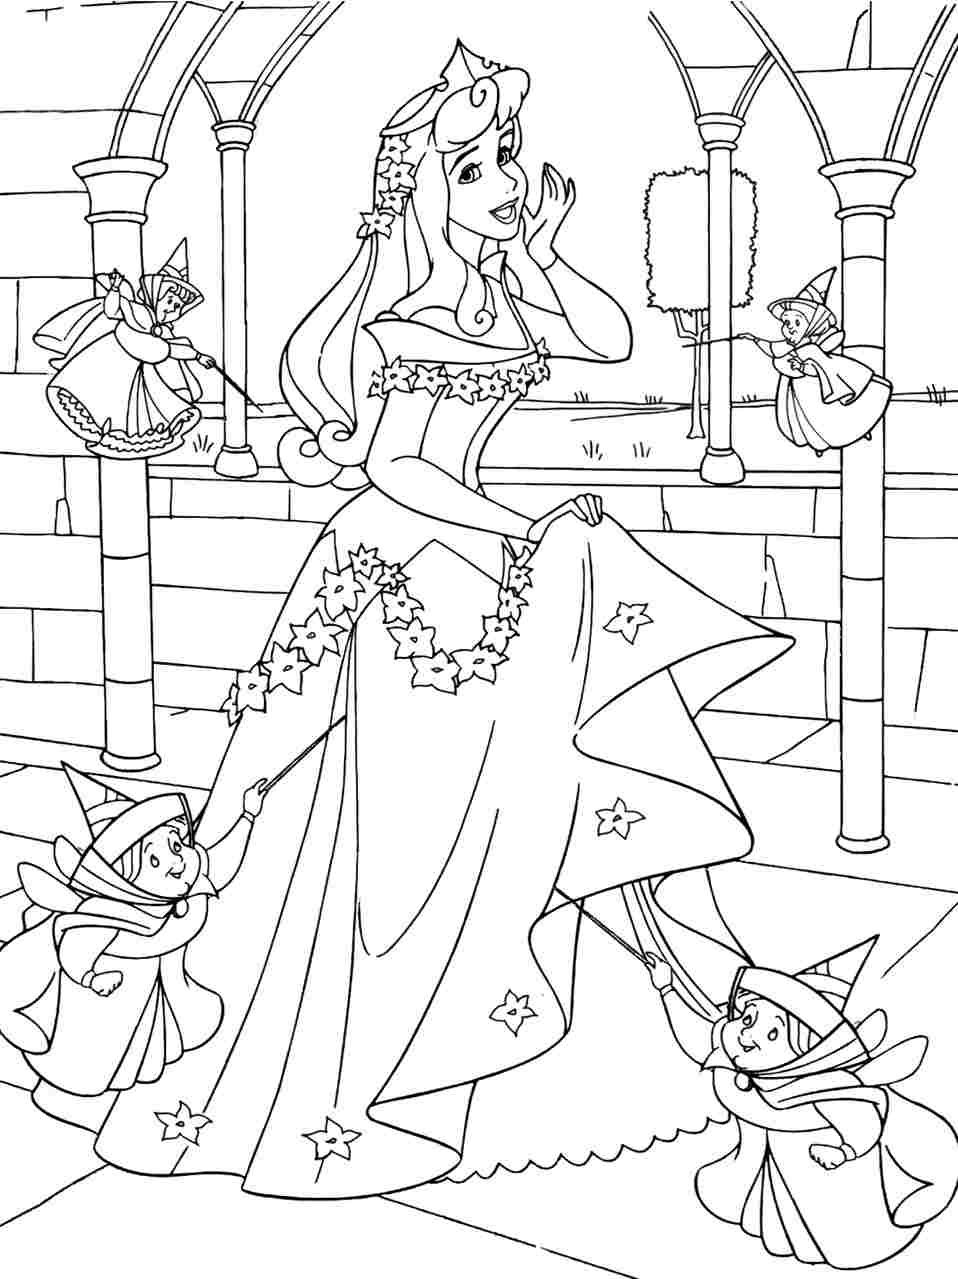 Sleeping Beauty at the Castle coloring book to print and online